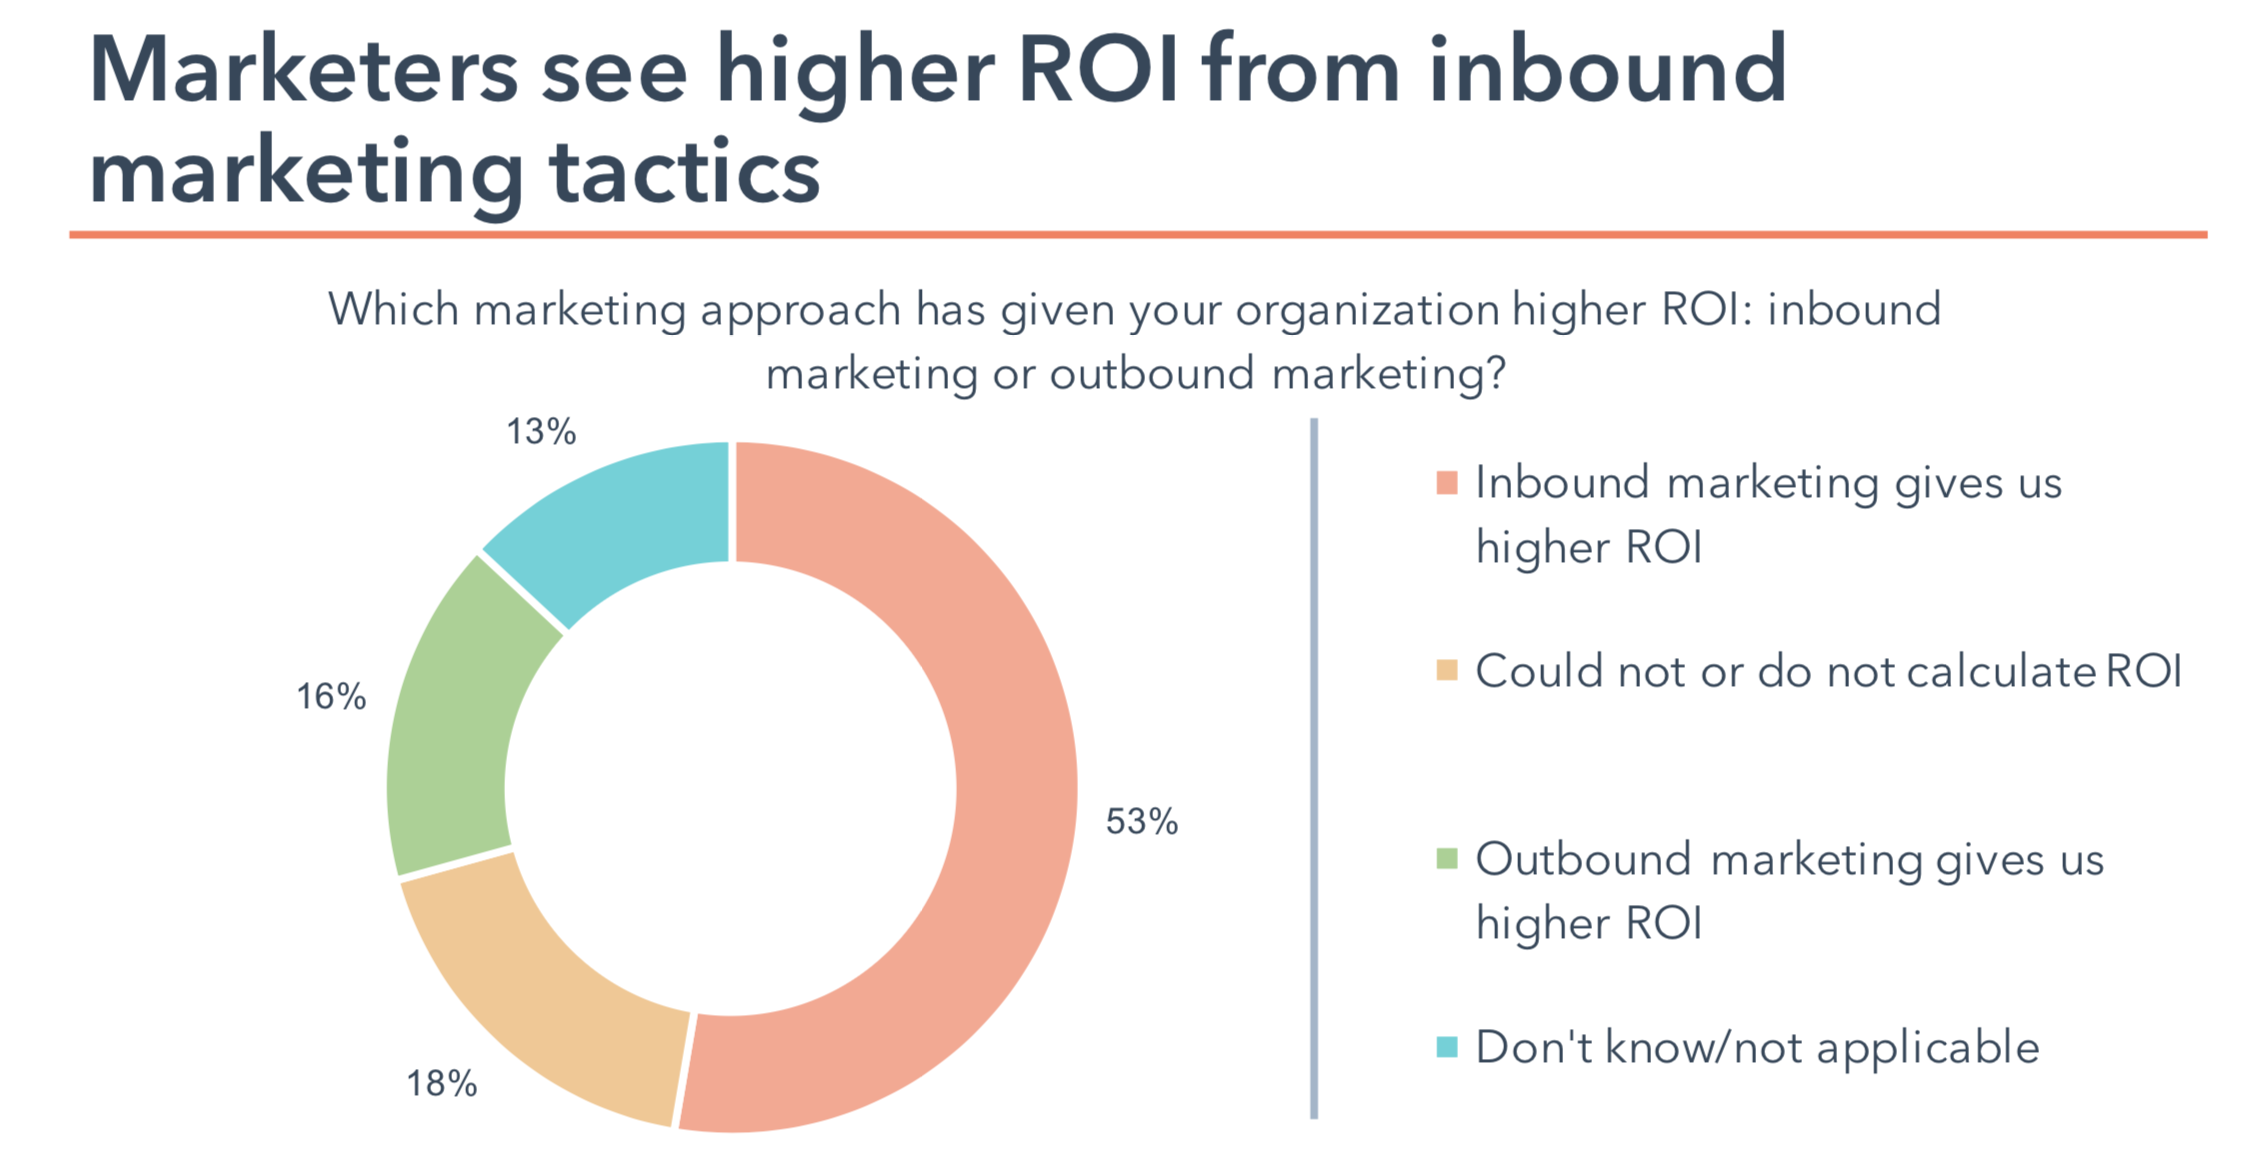 Marketers see higher ROI from inbound marketing tactics